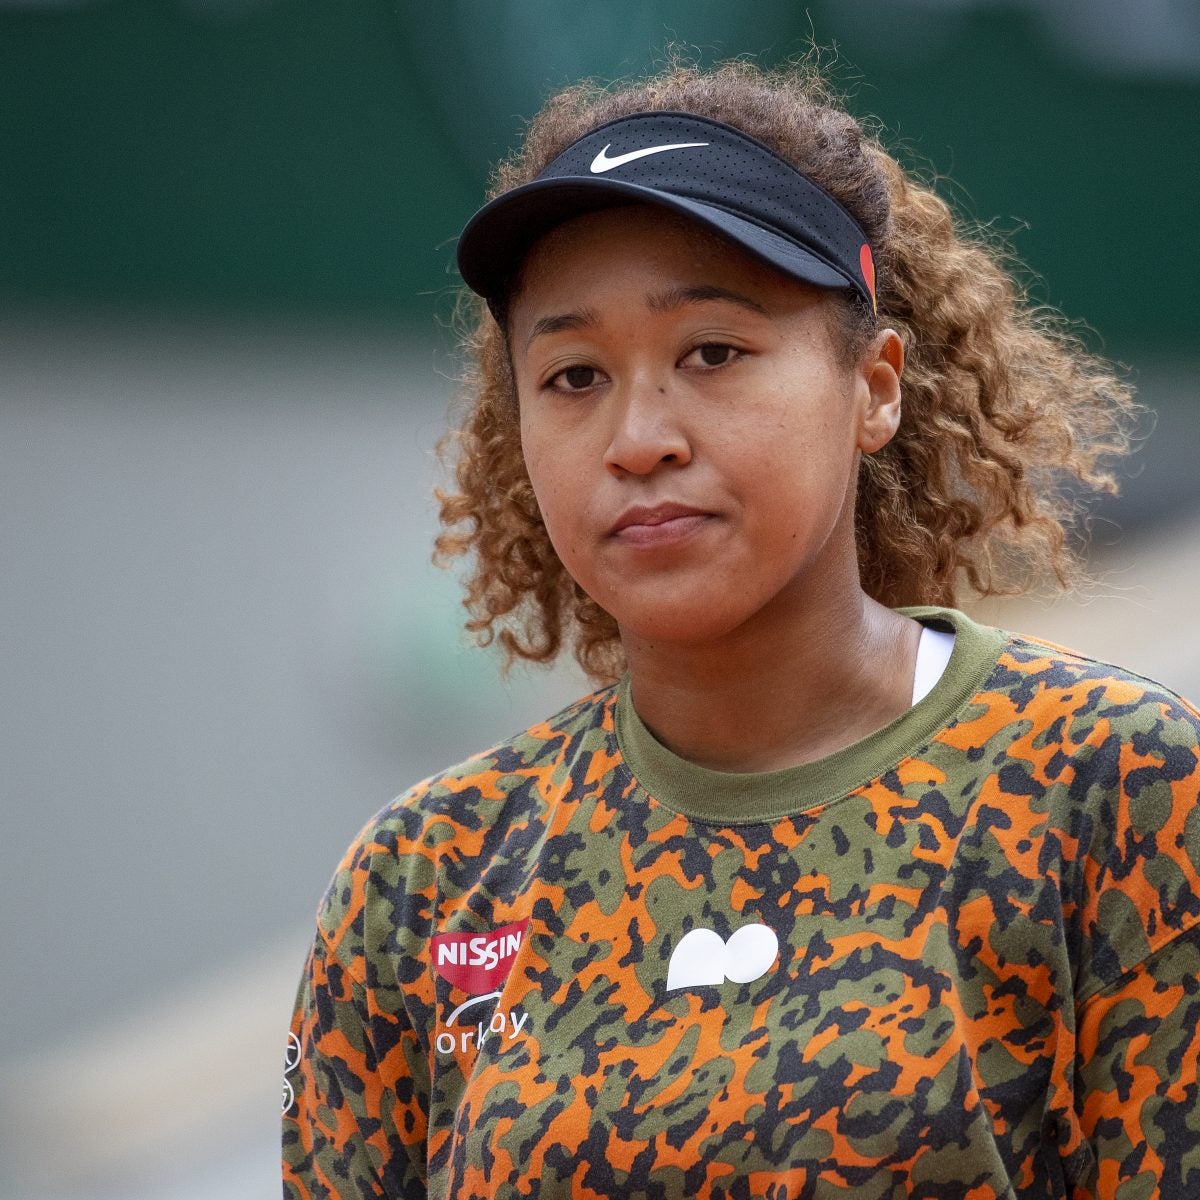 Naomi Osaka Announces She Will Not Do Any Press At French Open Tournament To Protect Her Mental Health